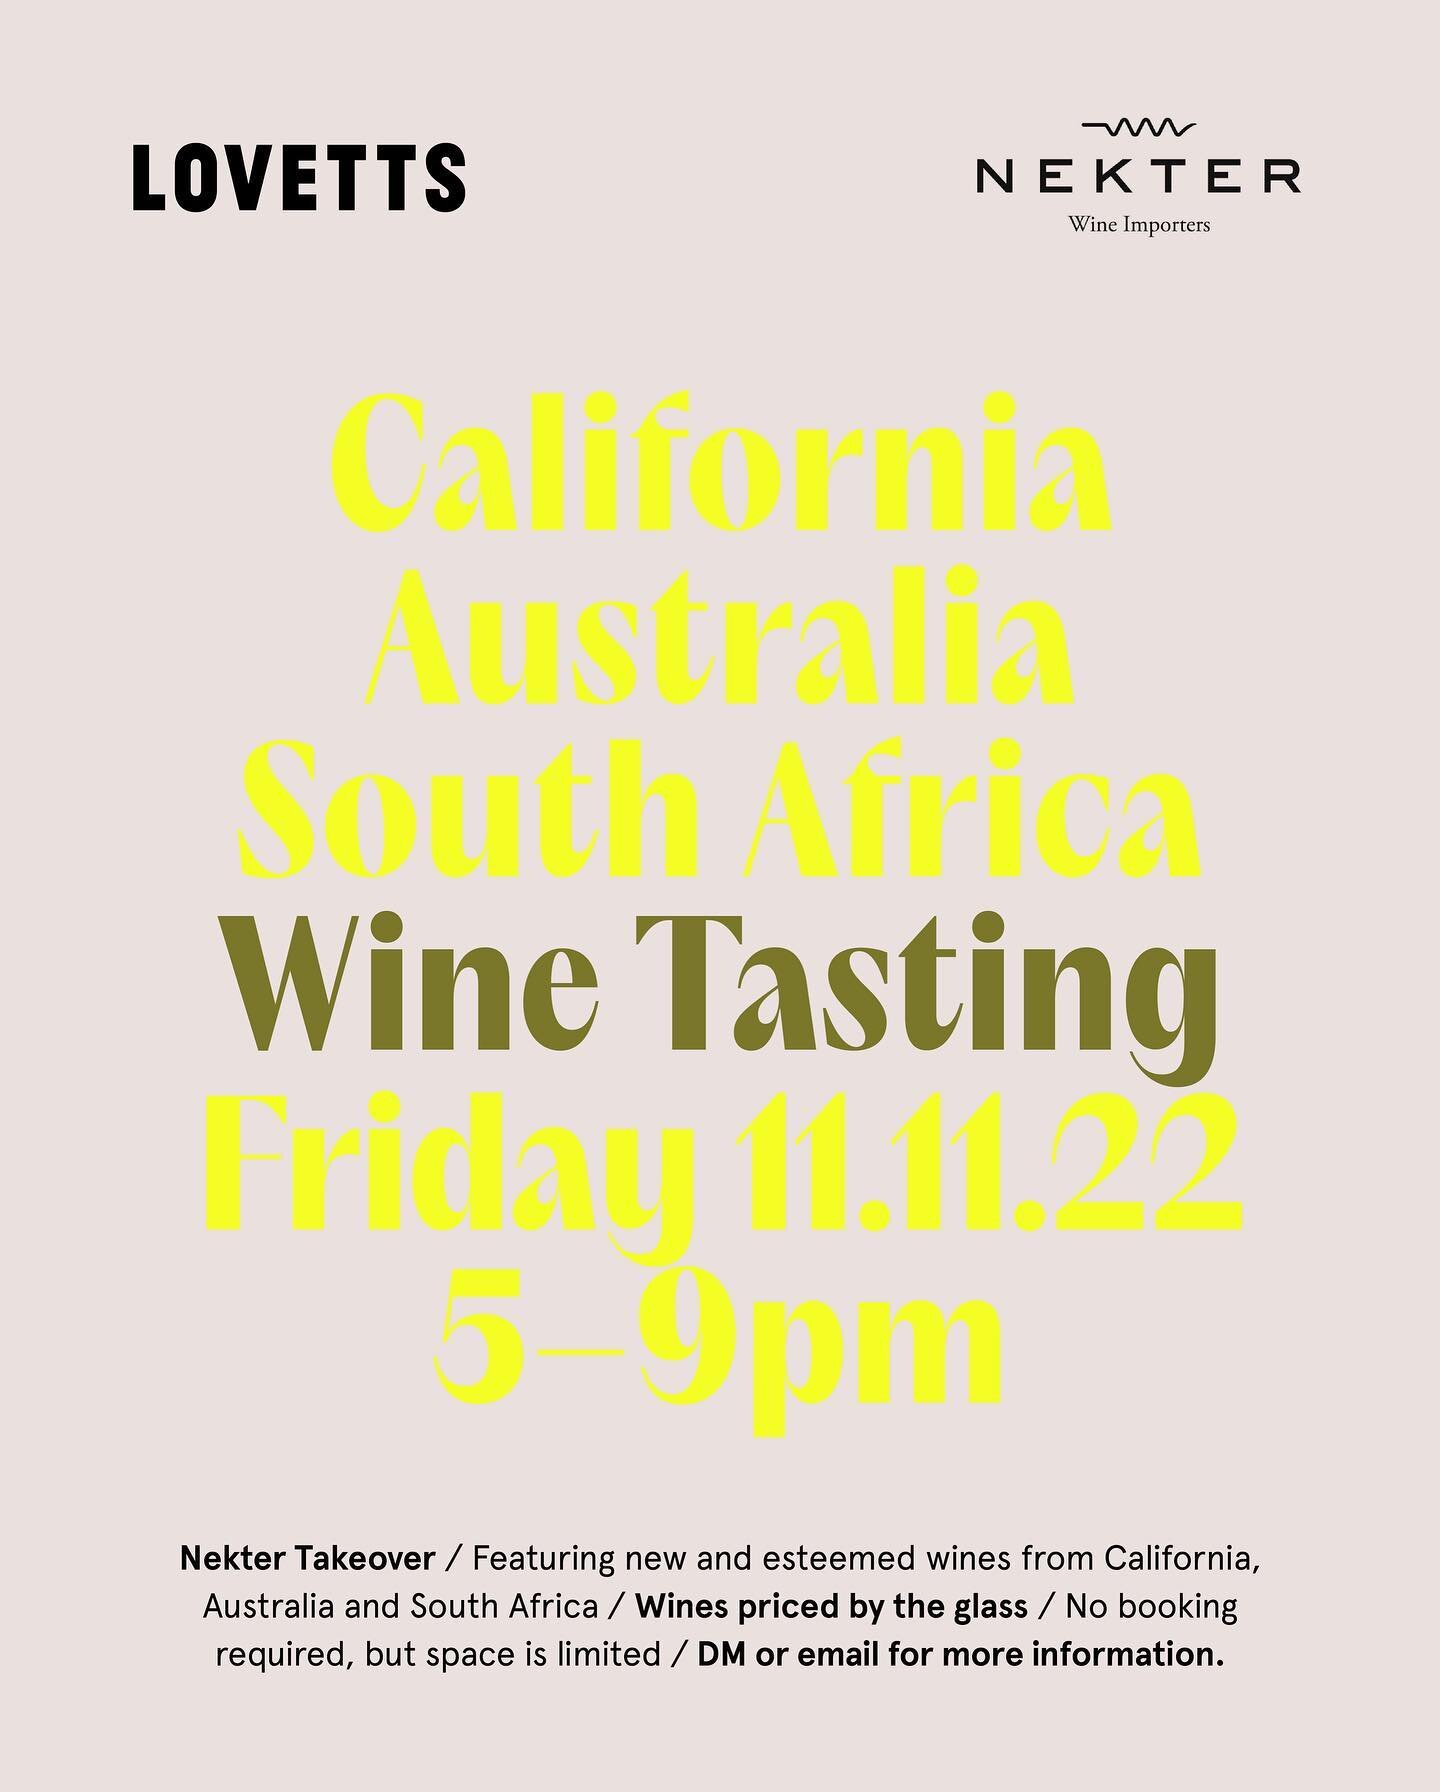 AUTUMN TASTING⁣
⁣
We are delighted to welcome @nekterwines to Lovetts THIS FRIDAY for our Autumn wine tasting. Arthur will be pouring a selection of new releases and old favourites from California, Australia and South Africa. ⁣
⁣
Nekter are importers